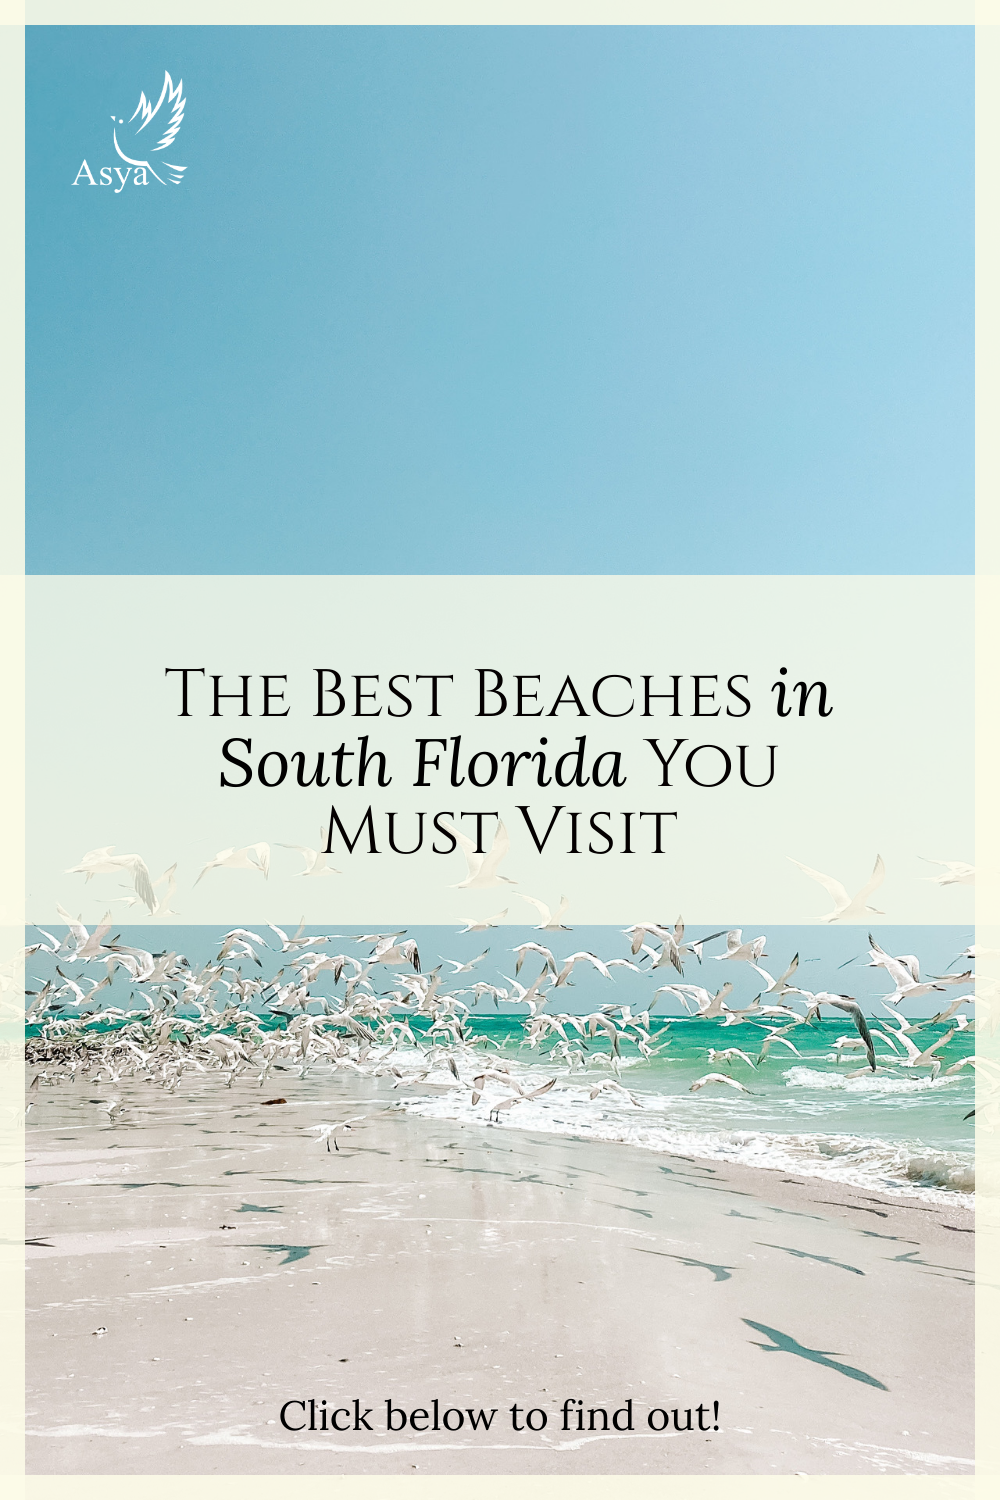 The Best Beaches in South Florida You Must Visit.jpg